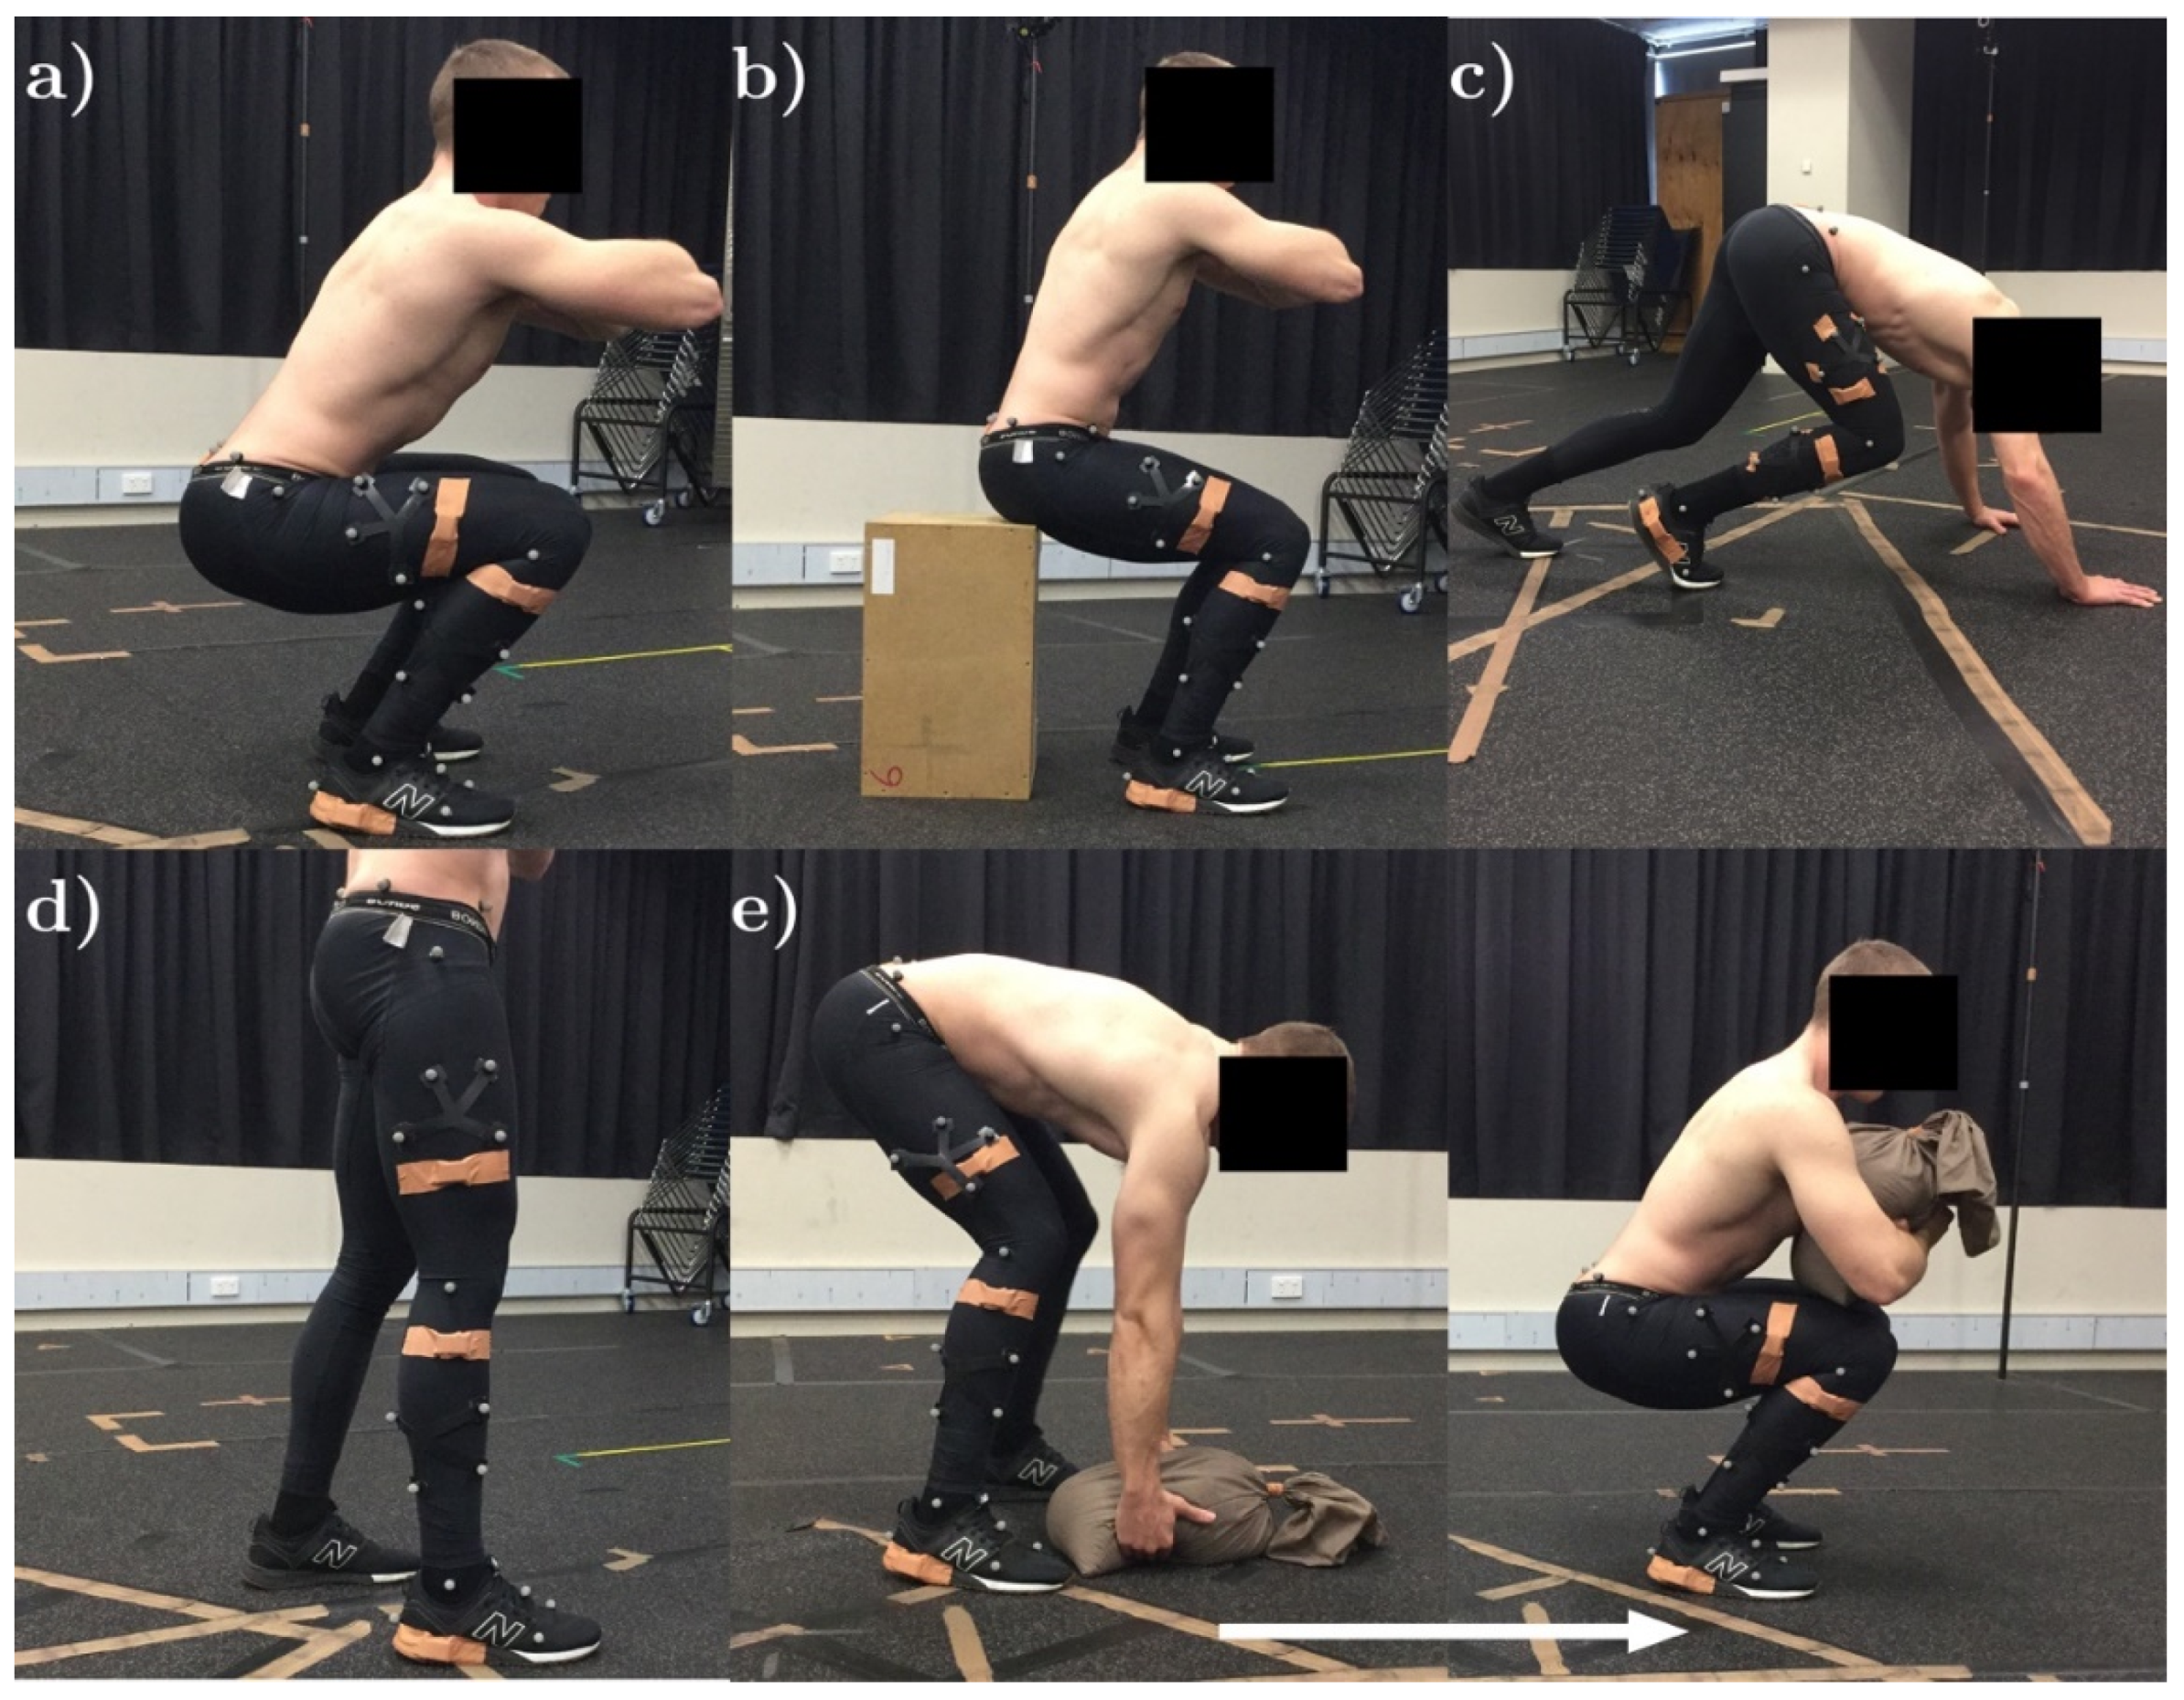 Sensors | Free Full-Text | Validation of Spatiotemporal and Kinematic  Measures in Functional Exercises Using a Minimal Modeling Inertial Sensor  Methodology | HTML